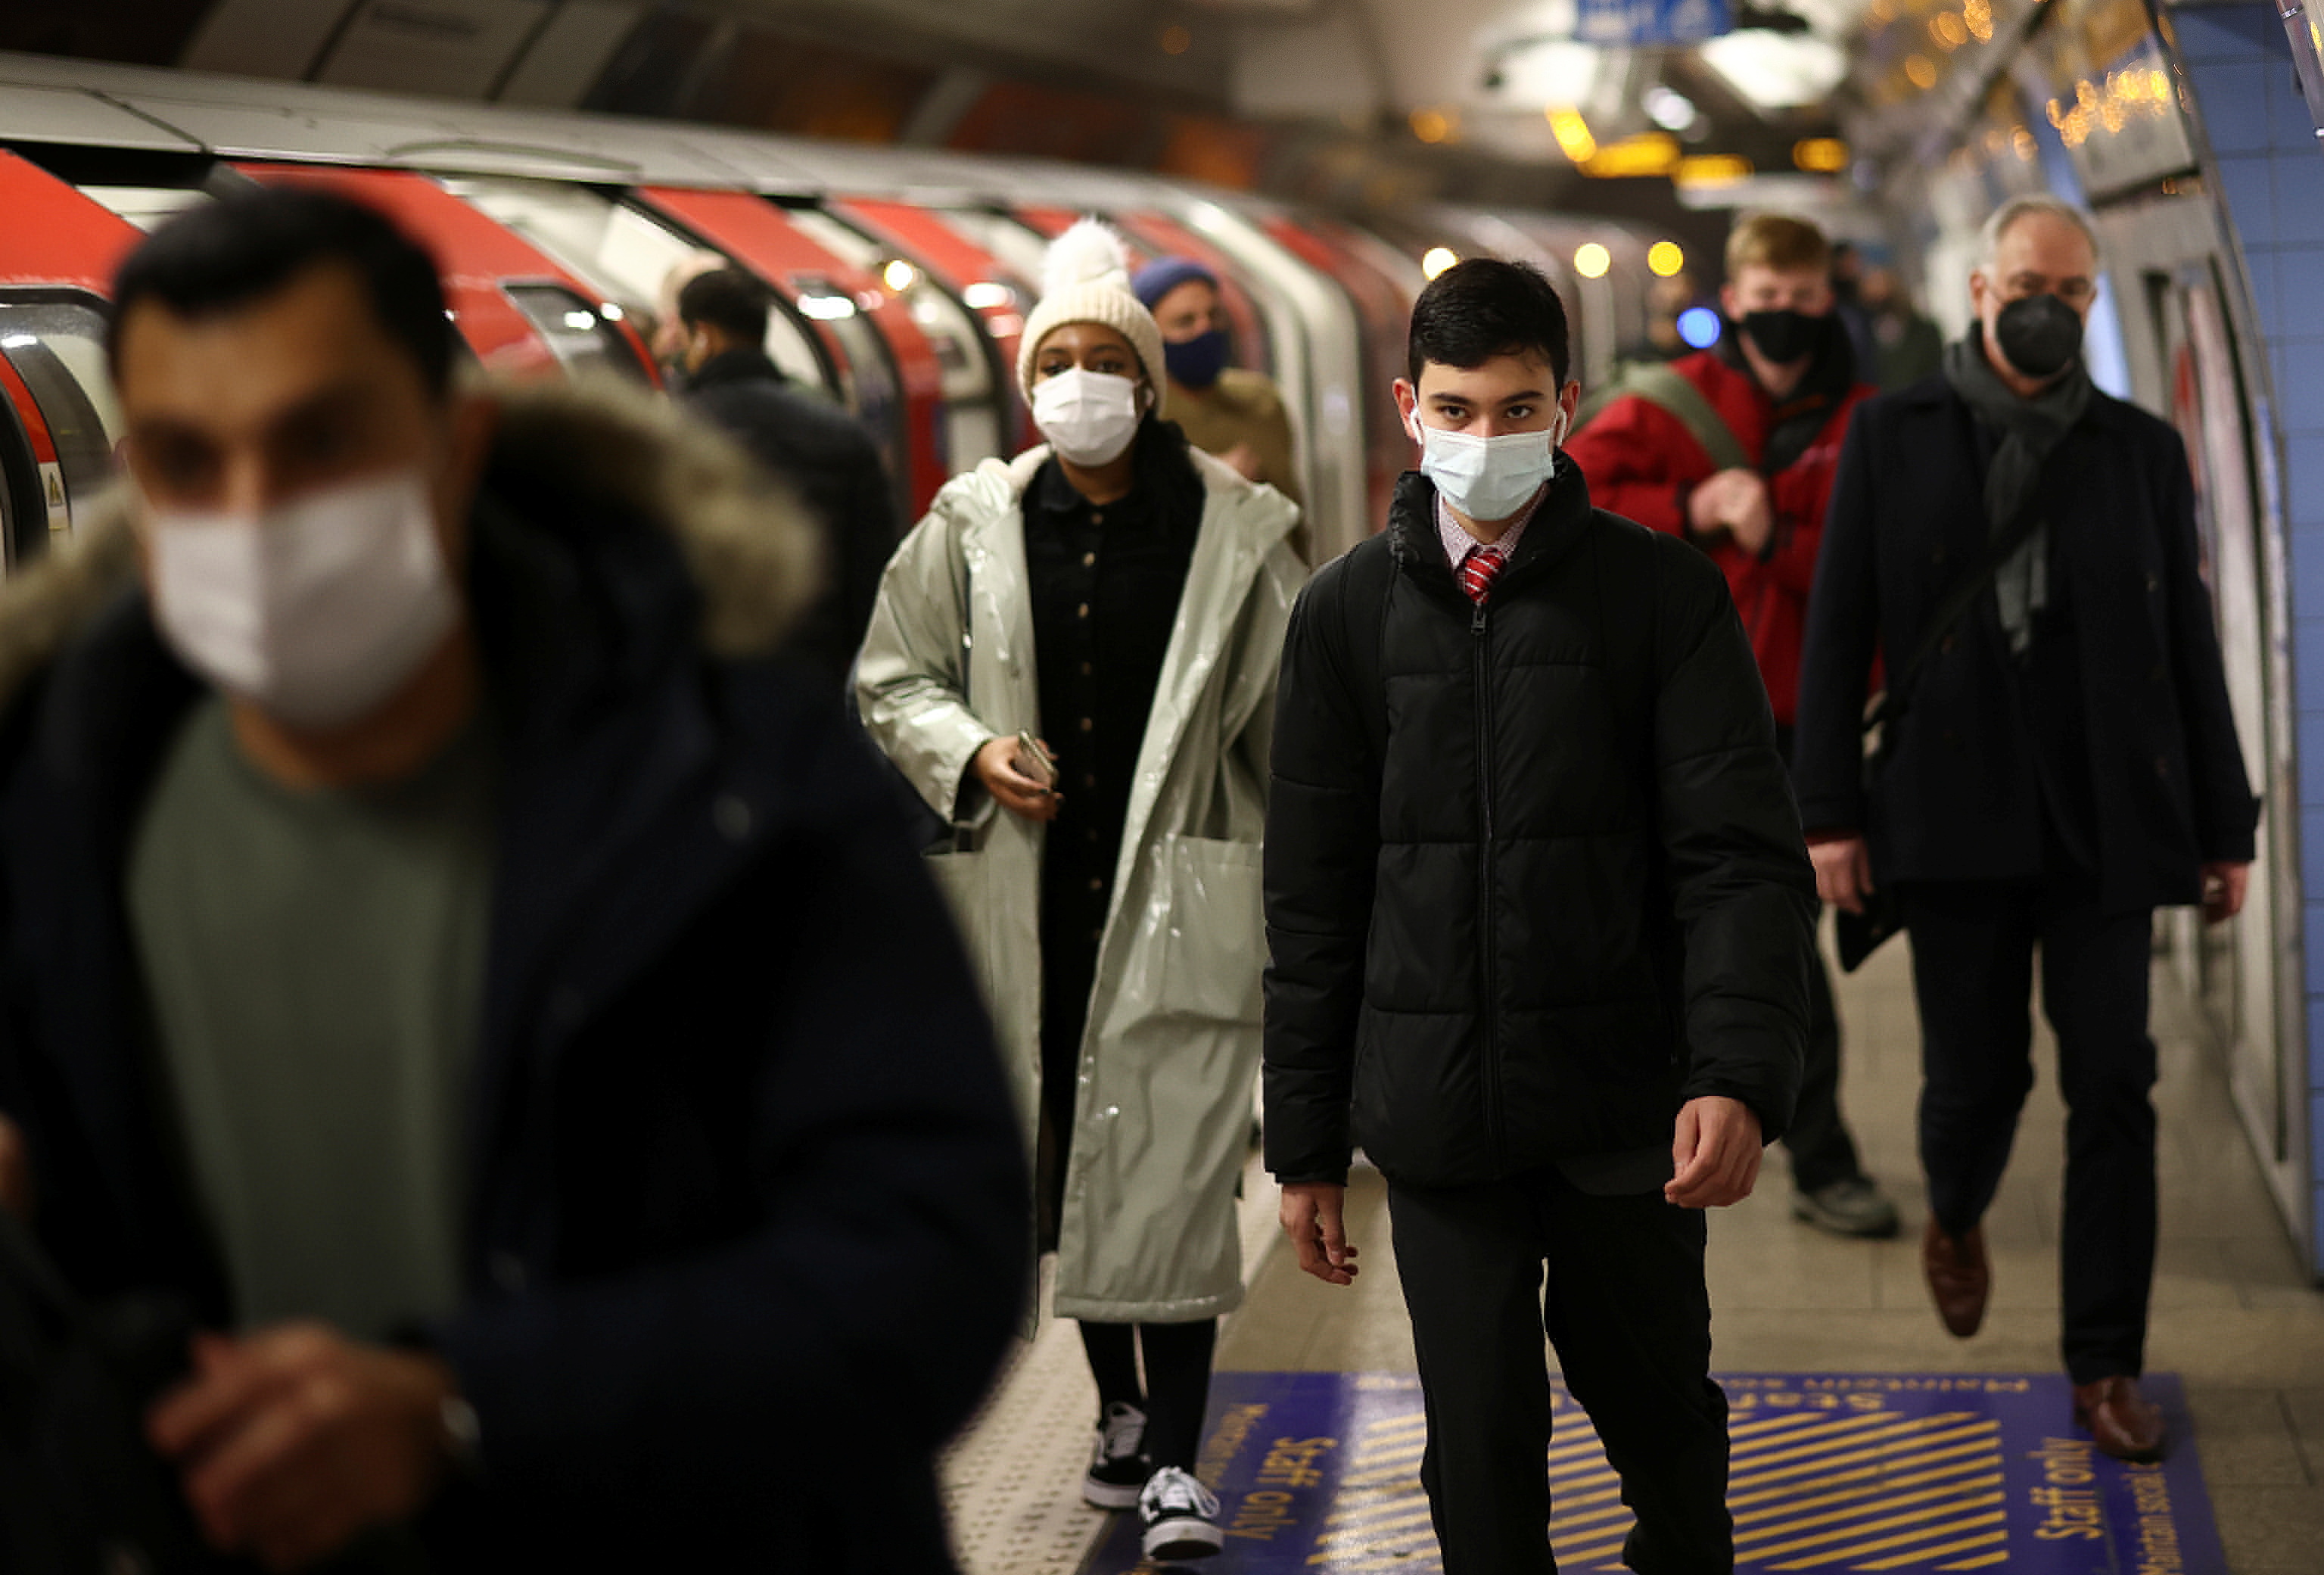 People walk along a platform at Euston underground station during morning rush hour, amid the coronavirus disease (COVID-19) outbreak in London, Britain, December 1, 2021. REUTERS/Henry Nicholls